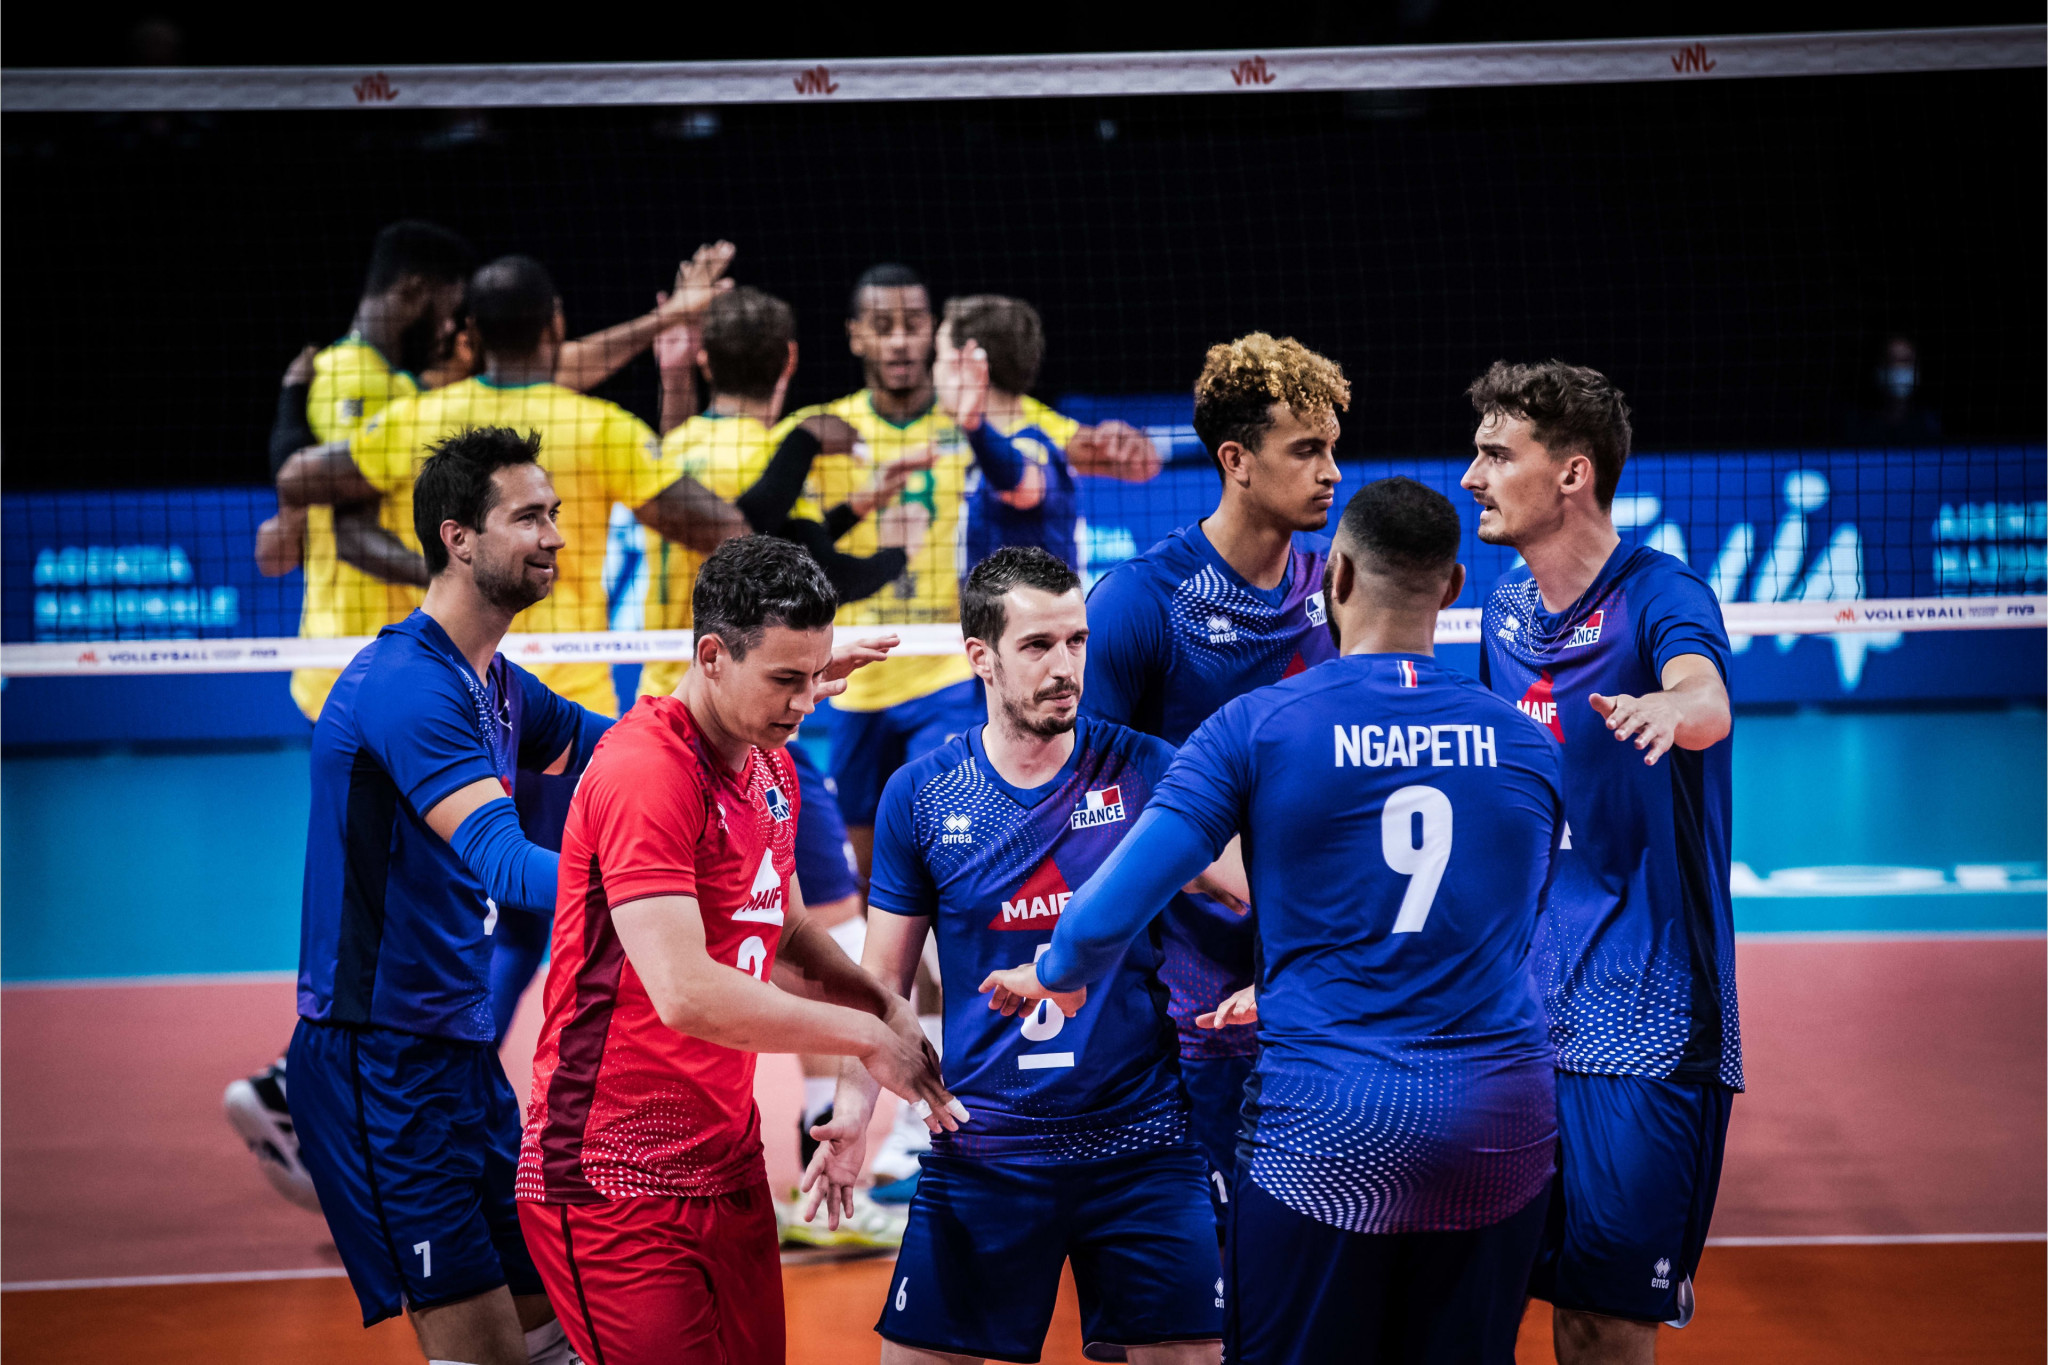 France suffer first loss of men’s Volleyball Nations League 2021 after five set Serbia defeat